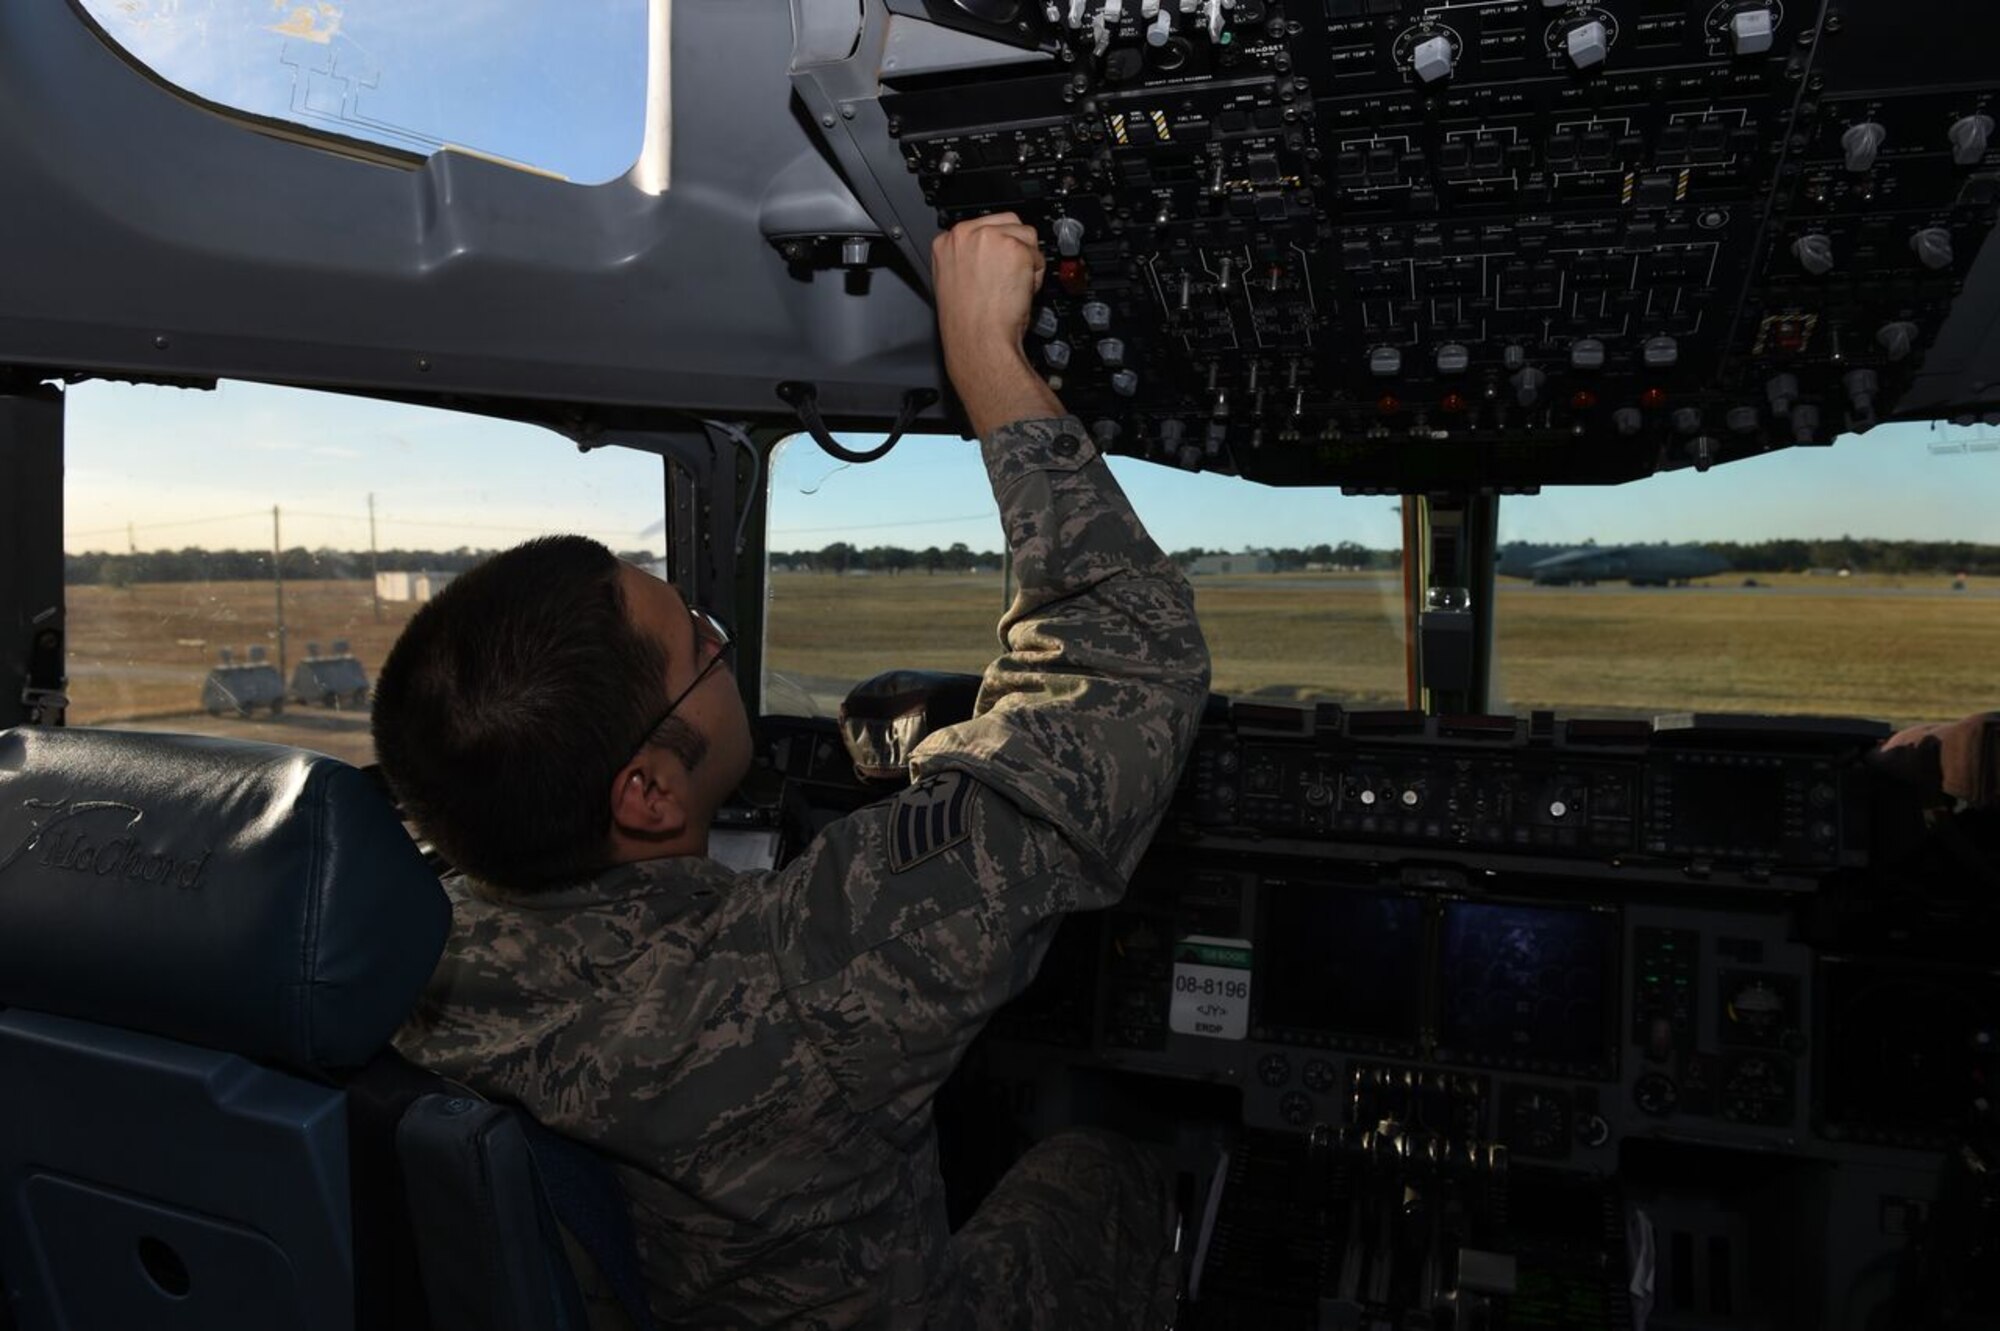 Staff Sgt. Arthur Mendoza, 62nd Aircraft Maintenance Squadron crew chief, performs pre-flight checks on a McChord Field C-17 Globemaster III on the flight line at Eglin Air Force Base, Fla., March 2, 2016. Mendoza and an air crew from Joint Base Lewis-McChord, Wash., participated in Air Mobility Command aircraft flare effectiveness testing. (U.S. Air Force photo/Staff Sgt. Naomi Shipley)